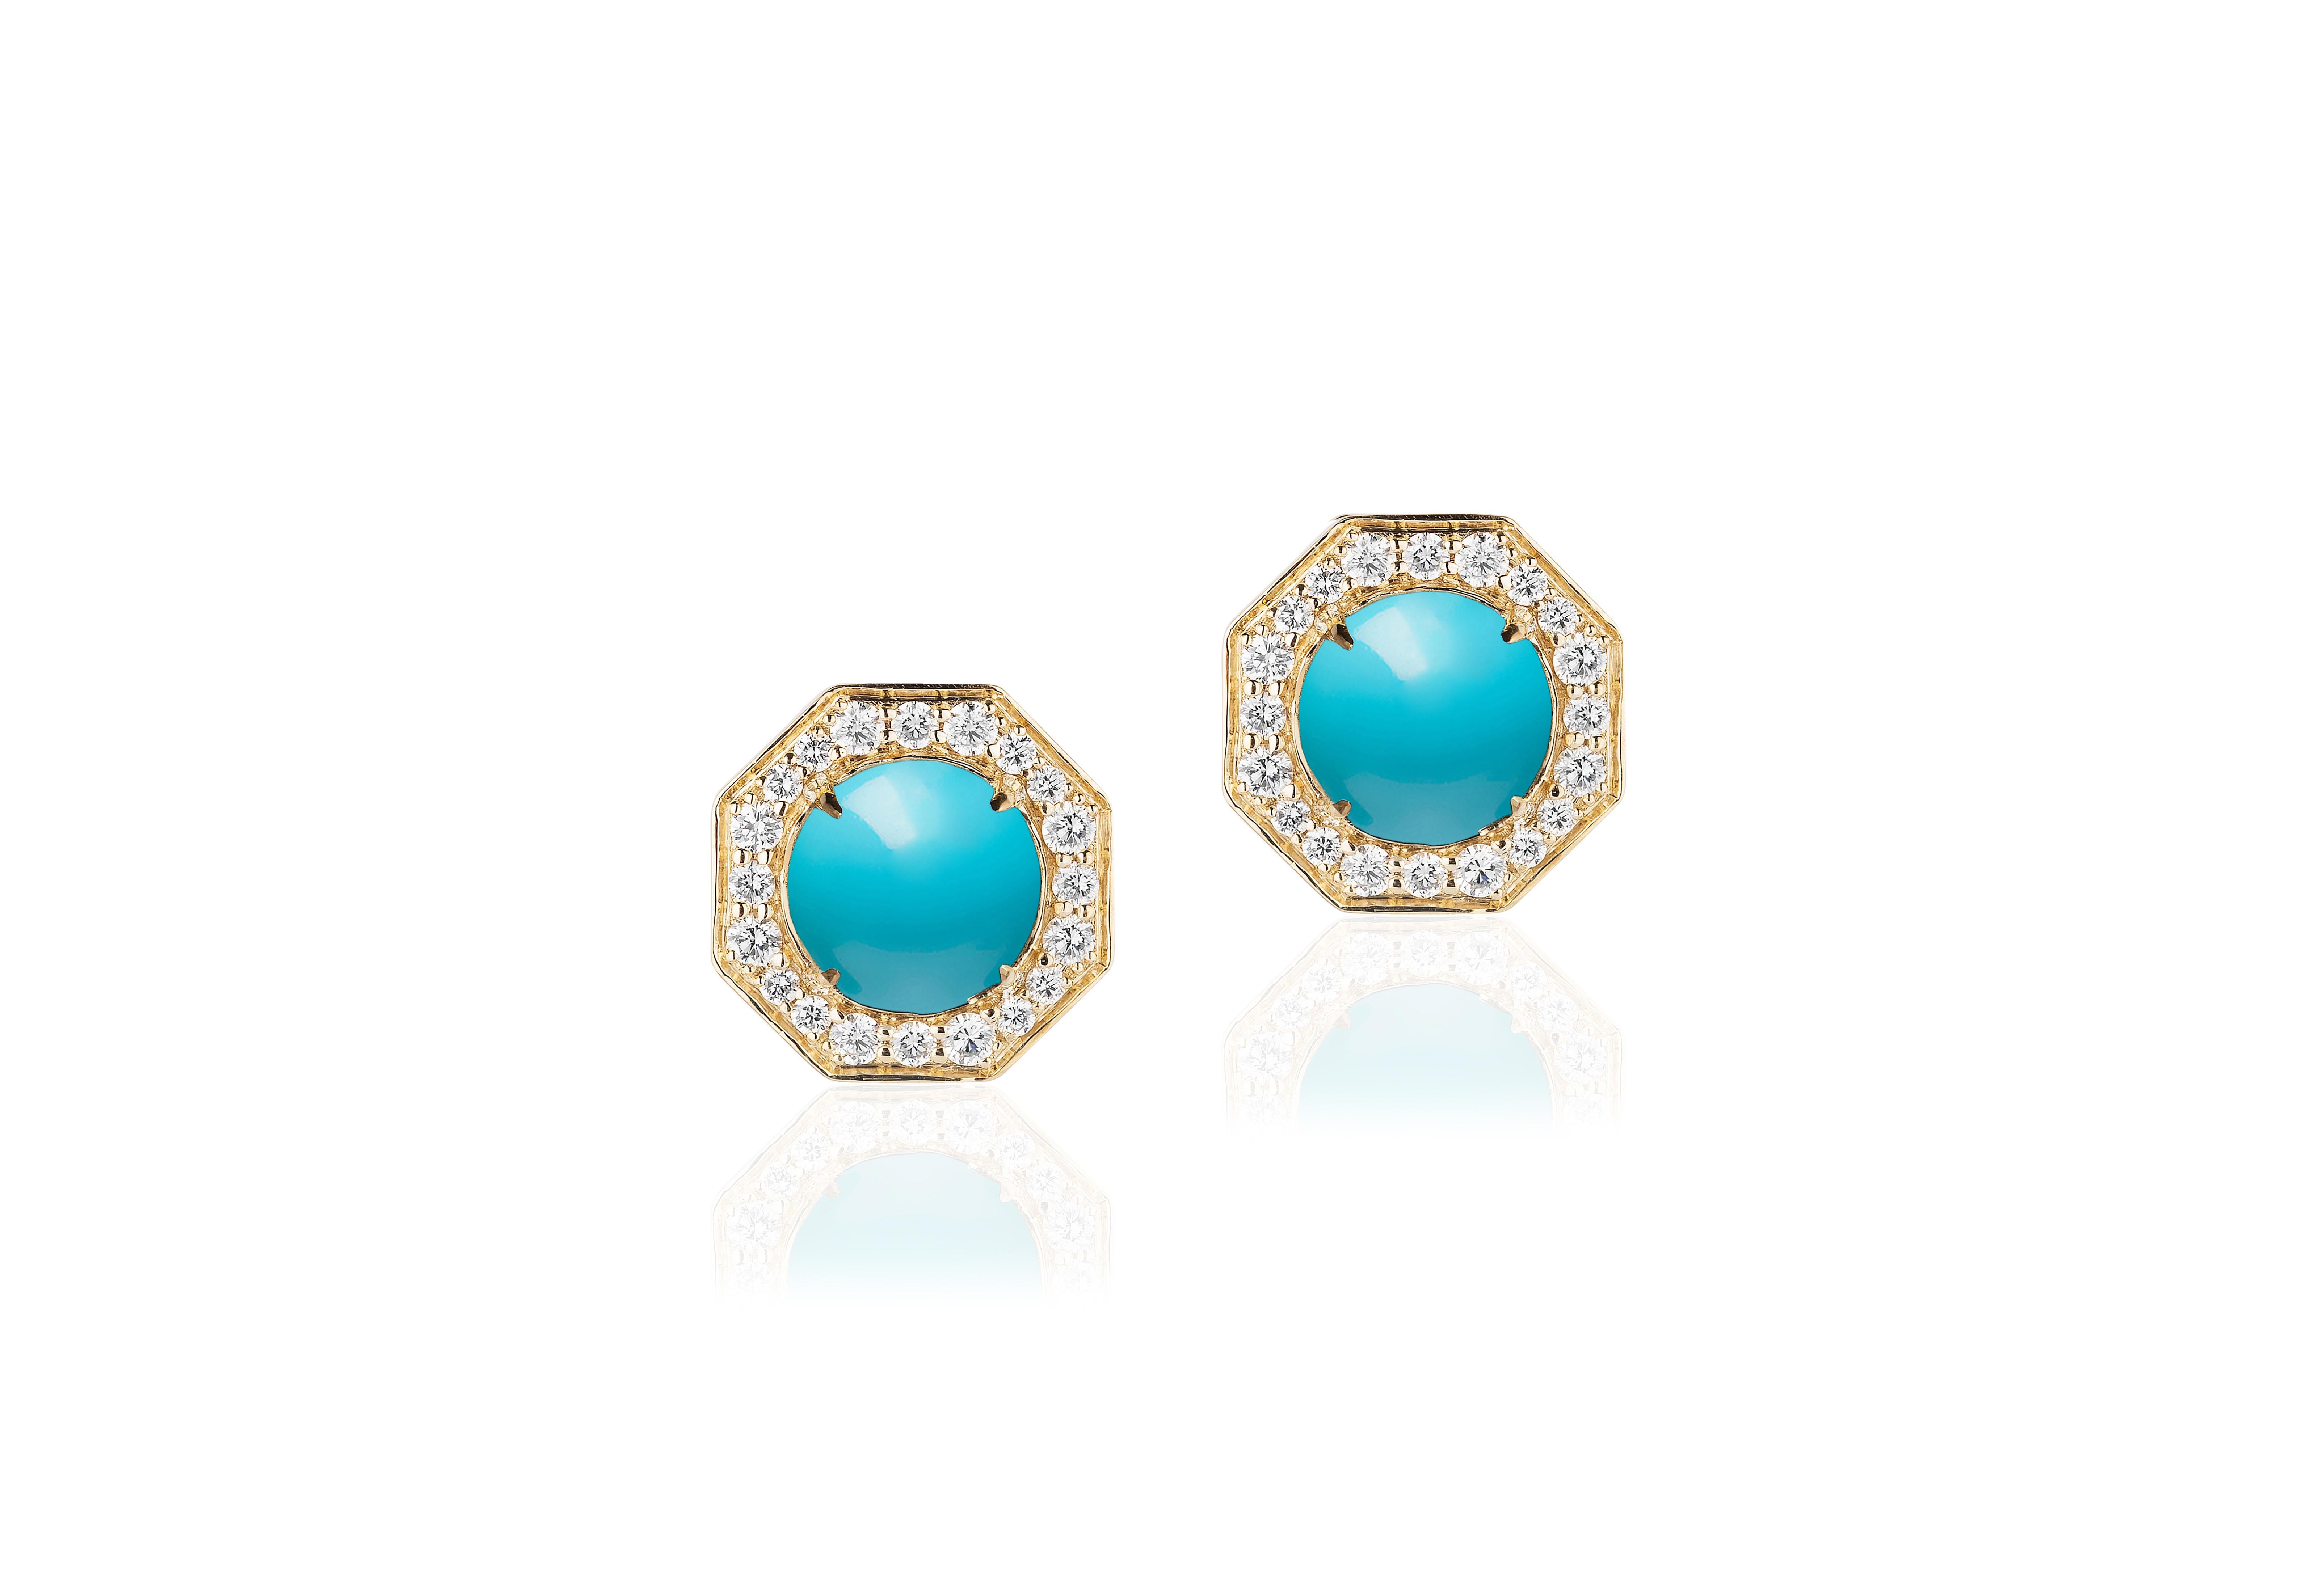 Turquoise Stud Earrings with Diamonds in 18k Yellow Gold, from 'Rock N Roll' Collection

Stone Size: 8 mm

Gemstone Weight: 2.92 Carats

Diamond: G-H / VS, Approx Wt: 0.60 Carats